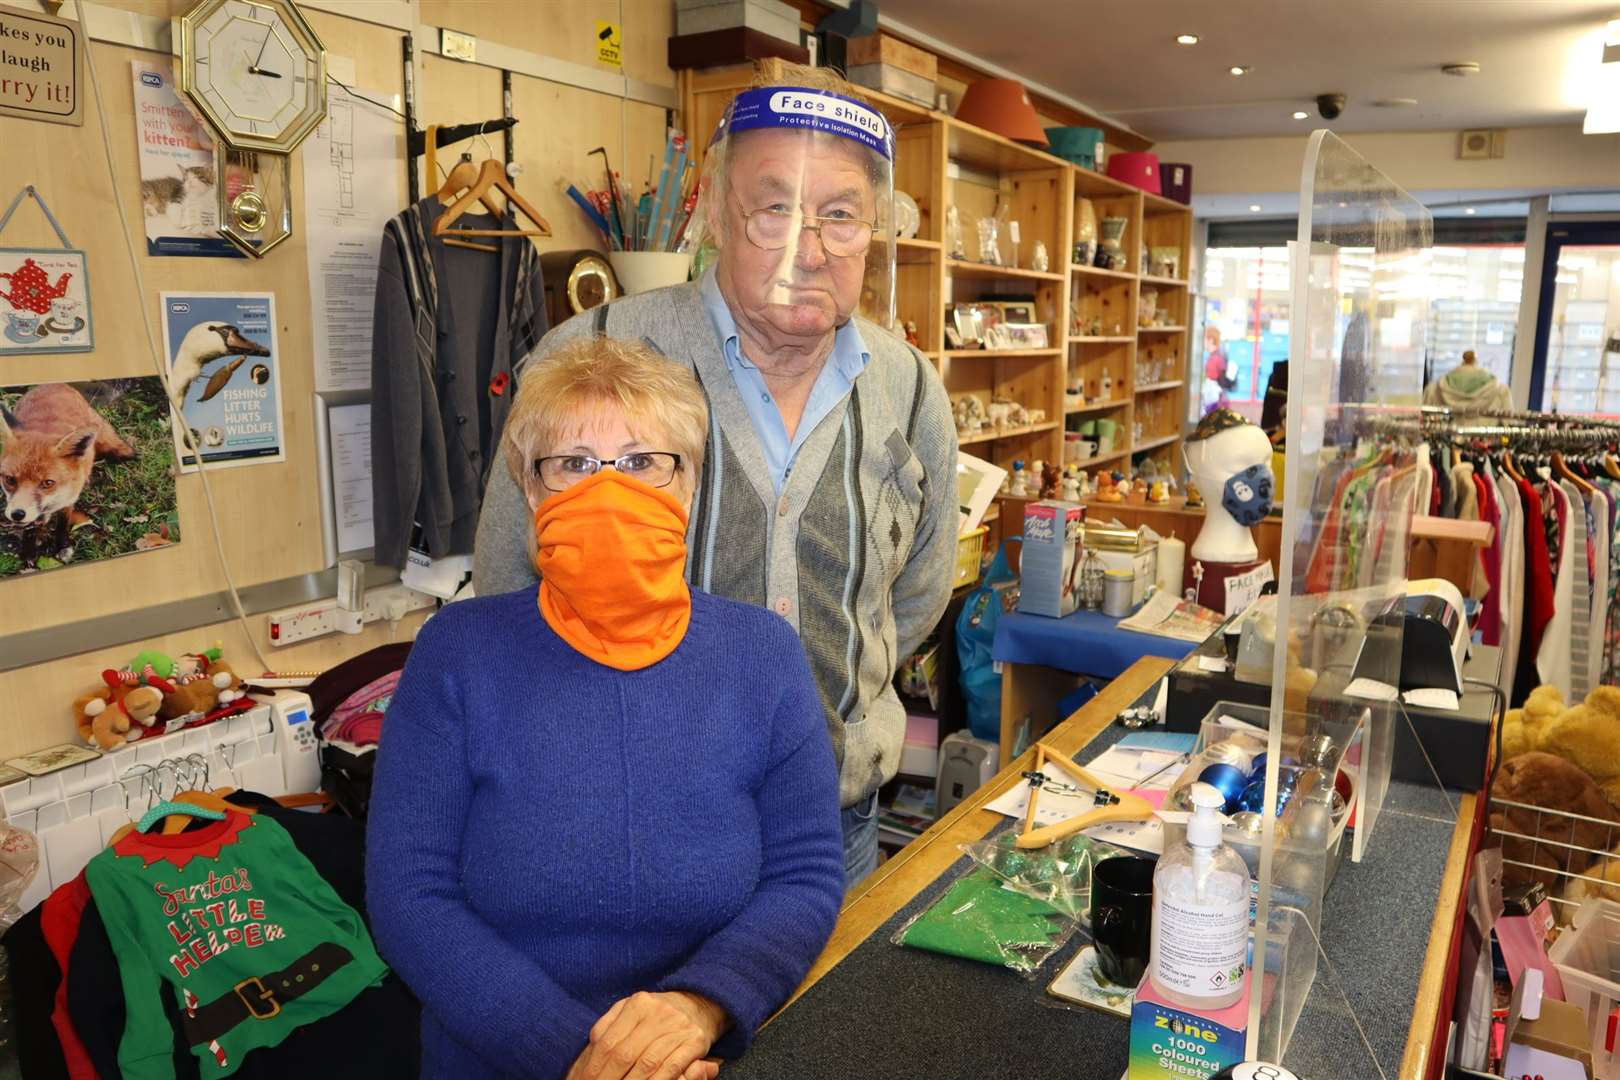 Sandra Pilkington and David Wright at the RSPCA charity shop on the eve of the second lockdown in Sheerness